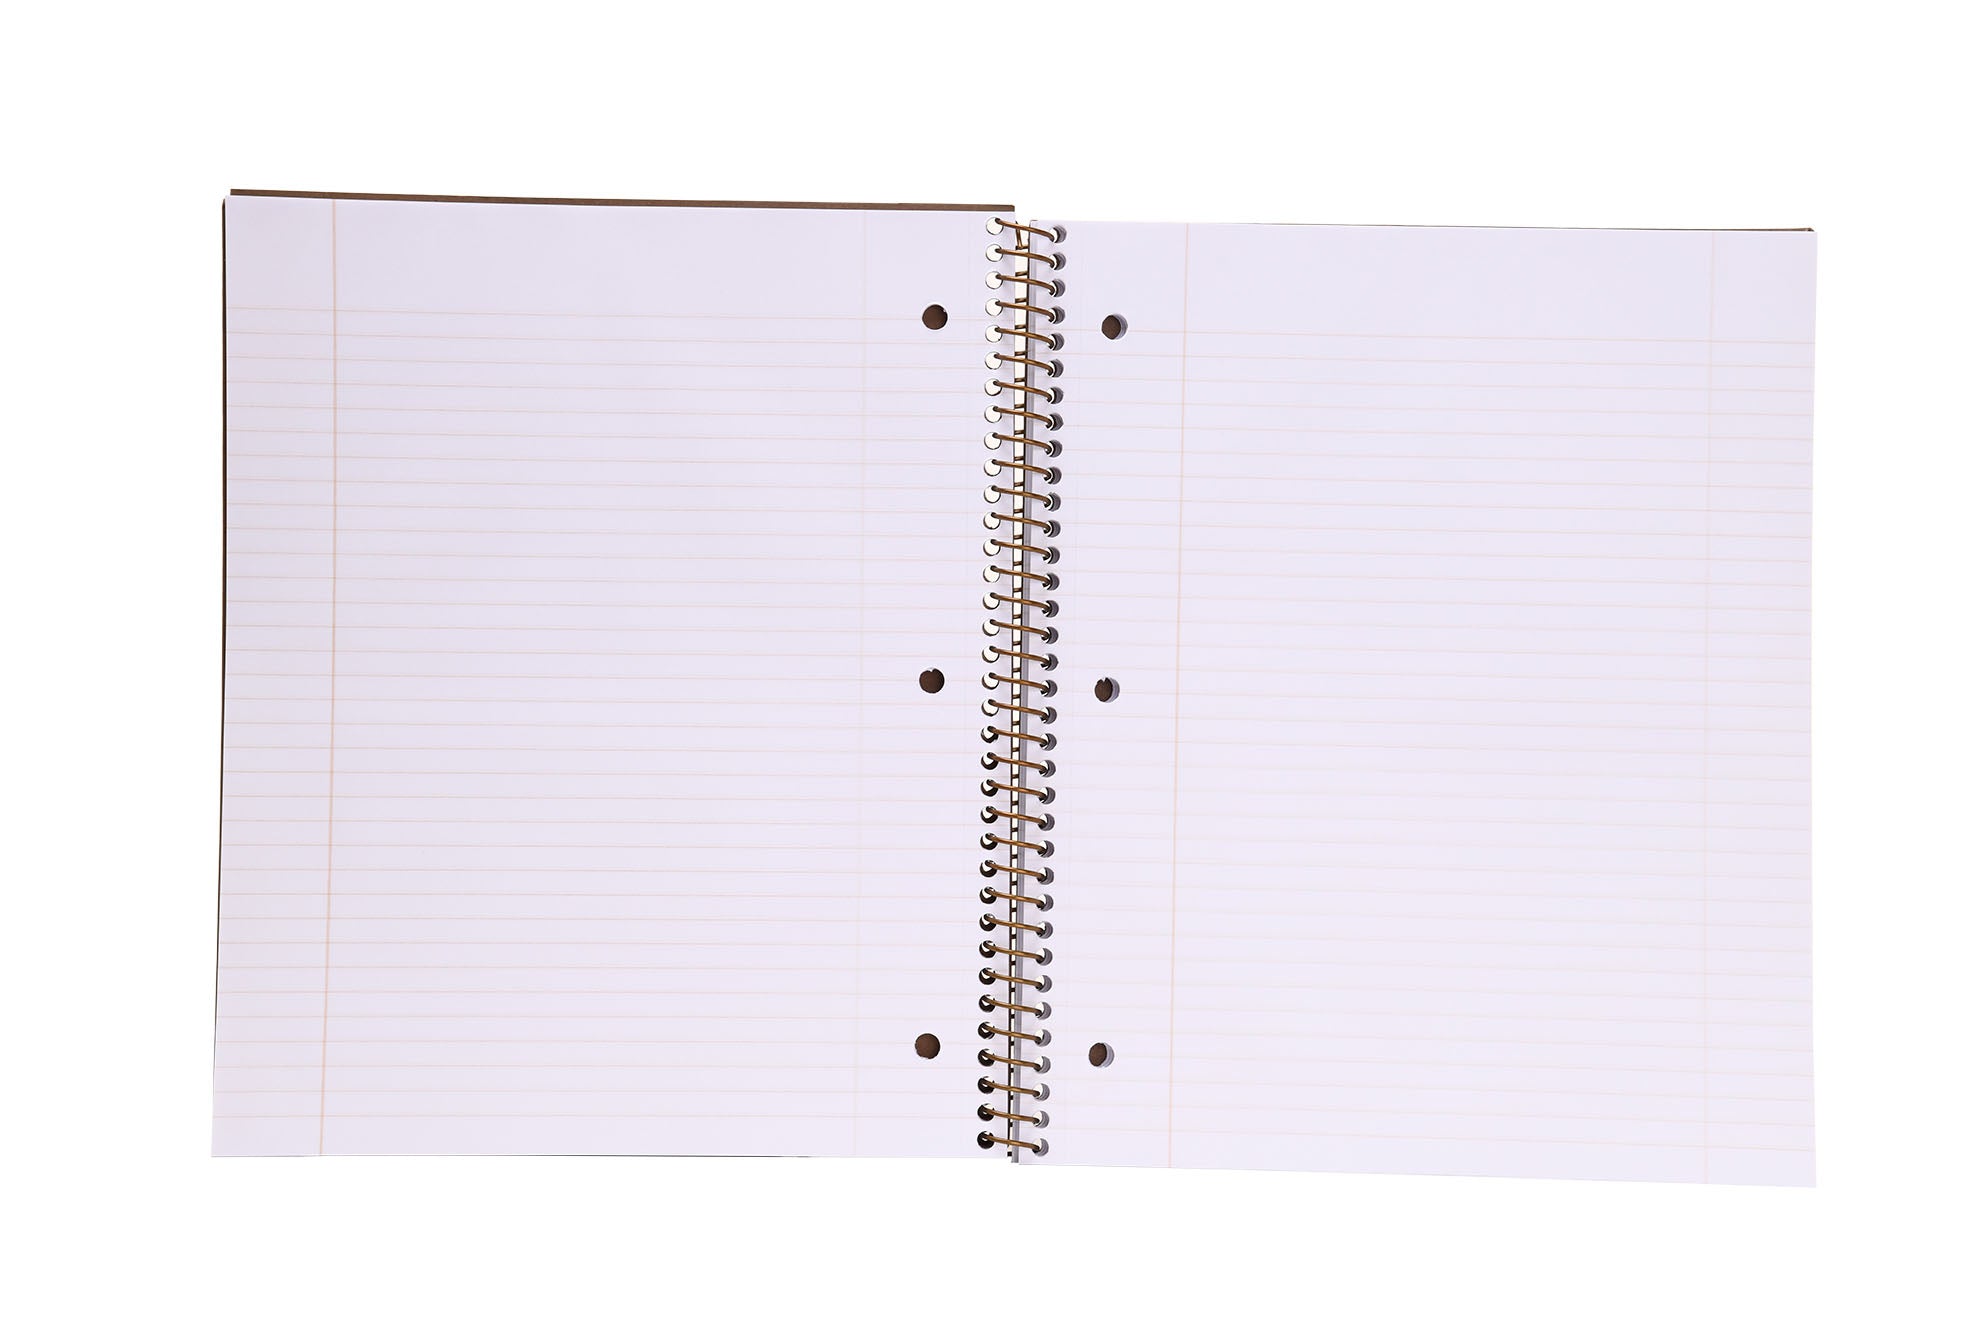 24 x 32 Eco-Friendly Recycled Chart Pad - 1.5 Ruled